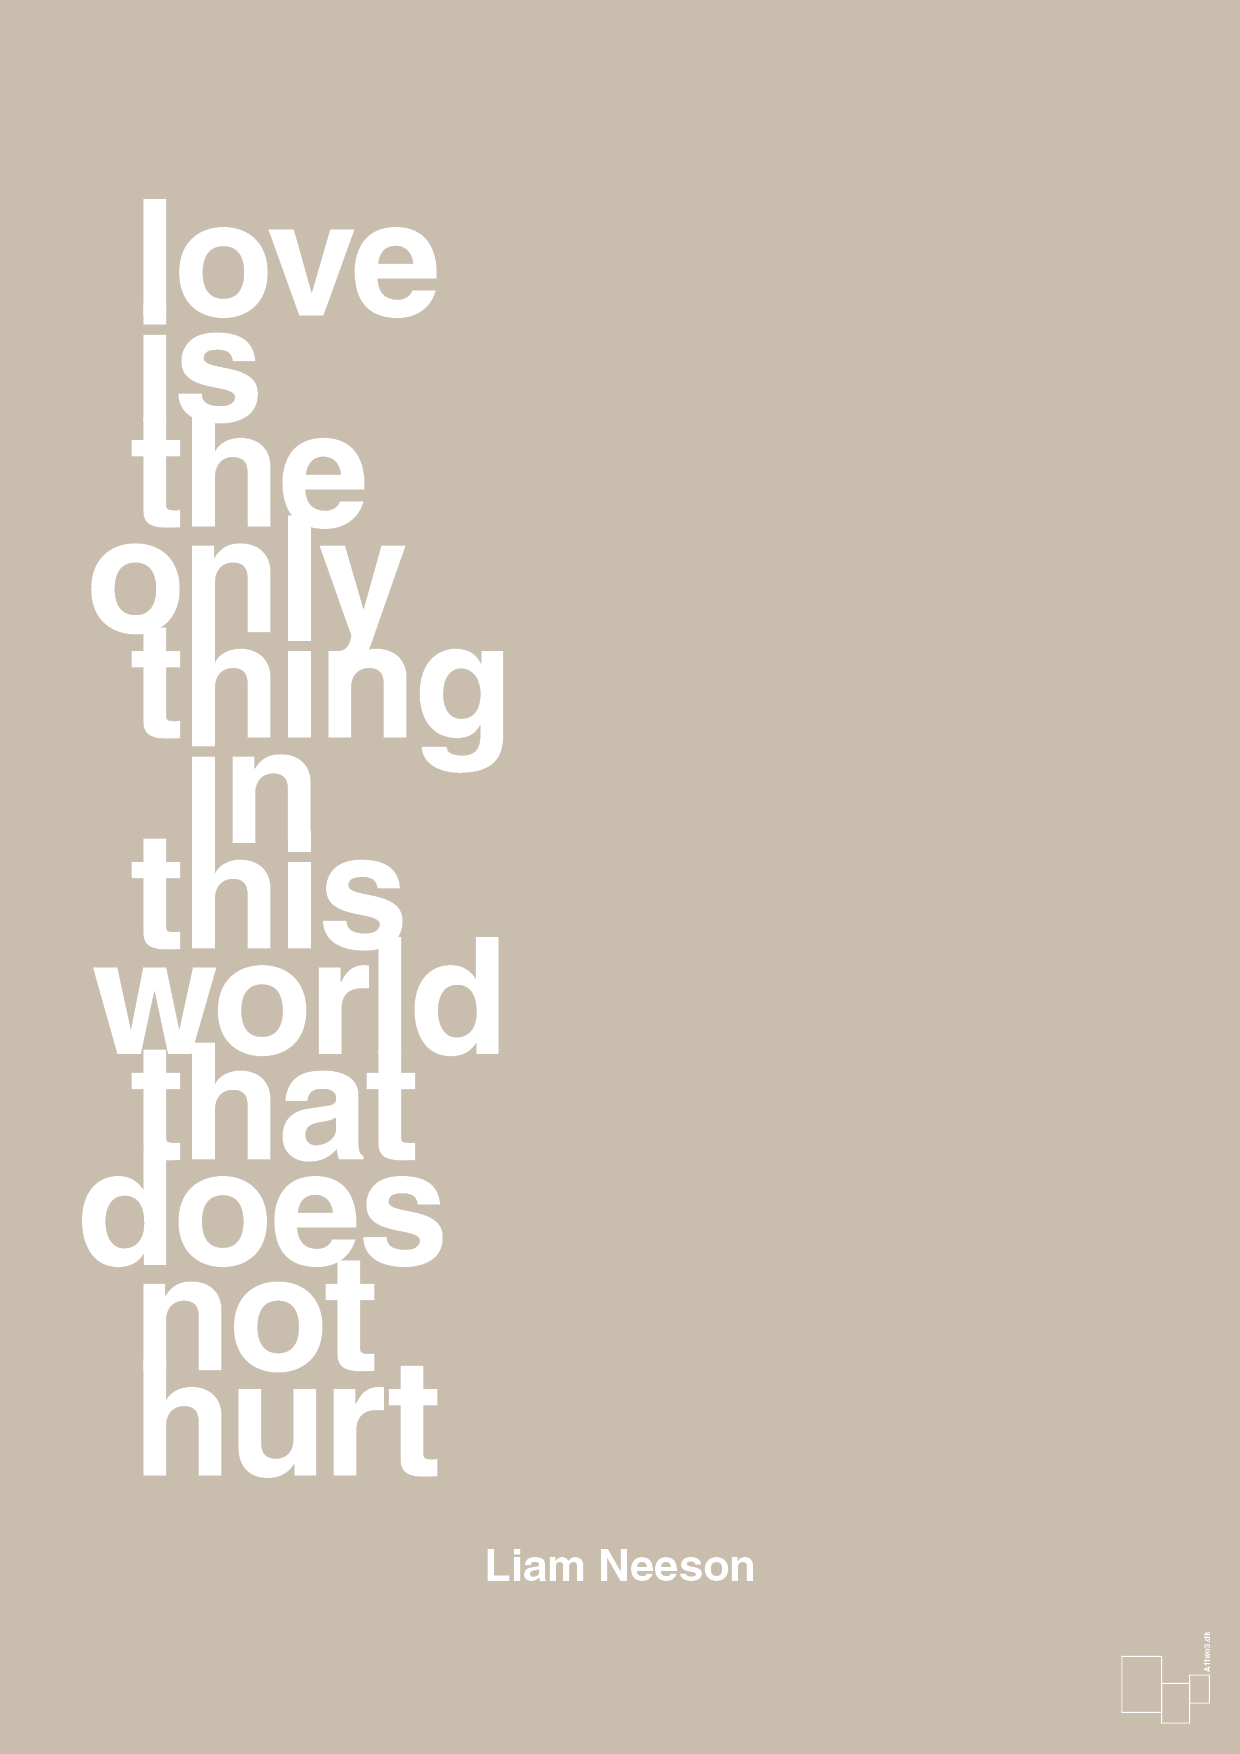 love is the only thing in this world that does not hurt - Plakat med Citater i Creamy Mushroom